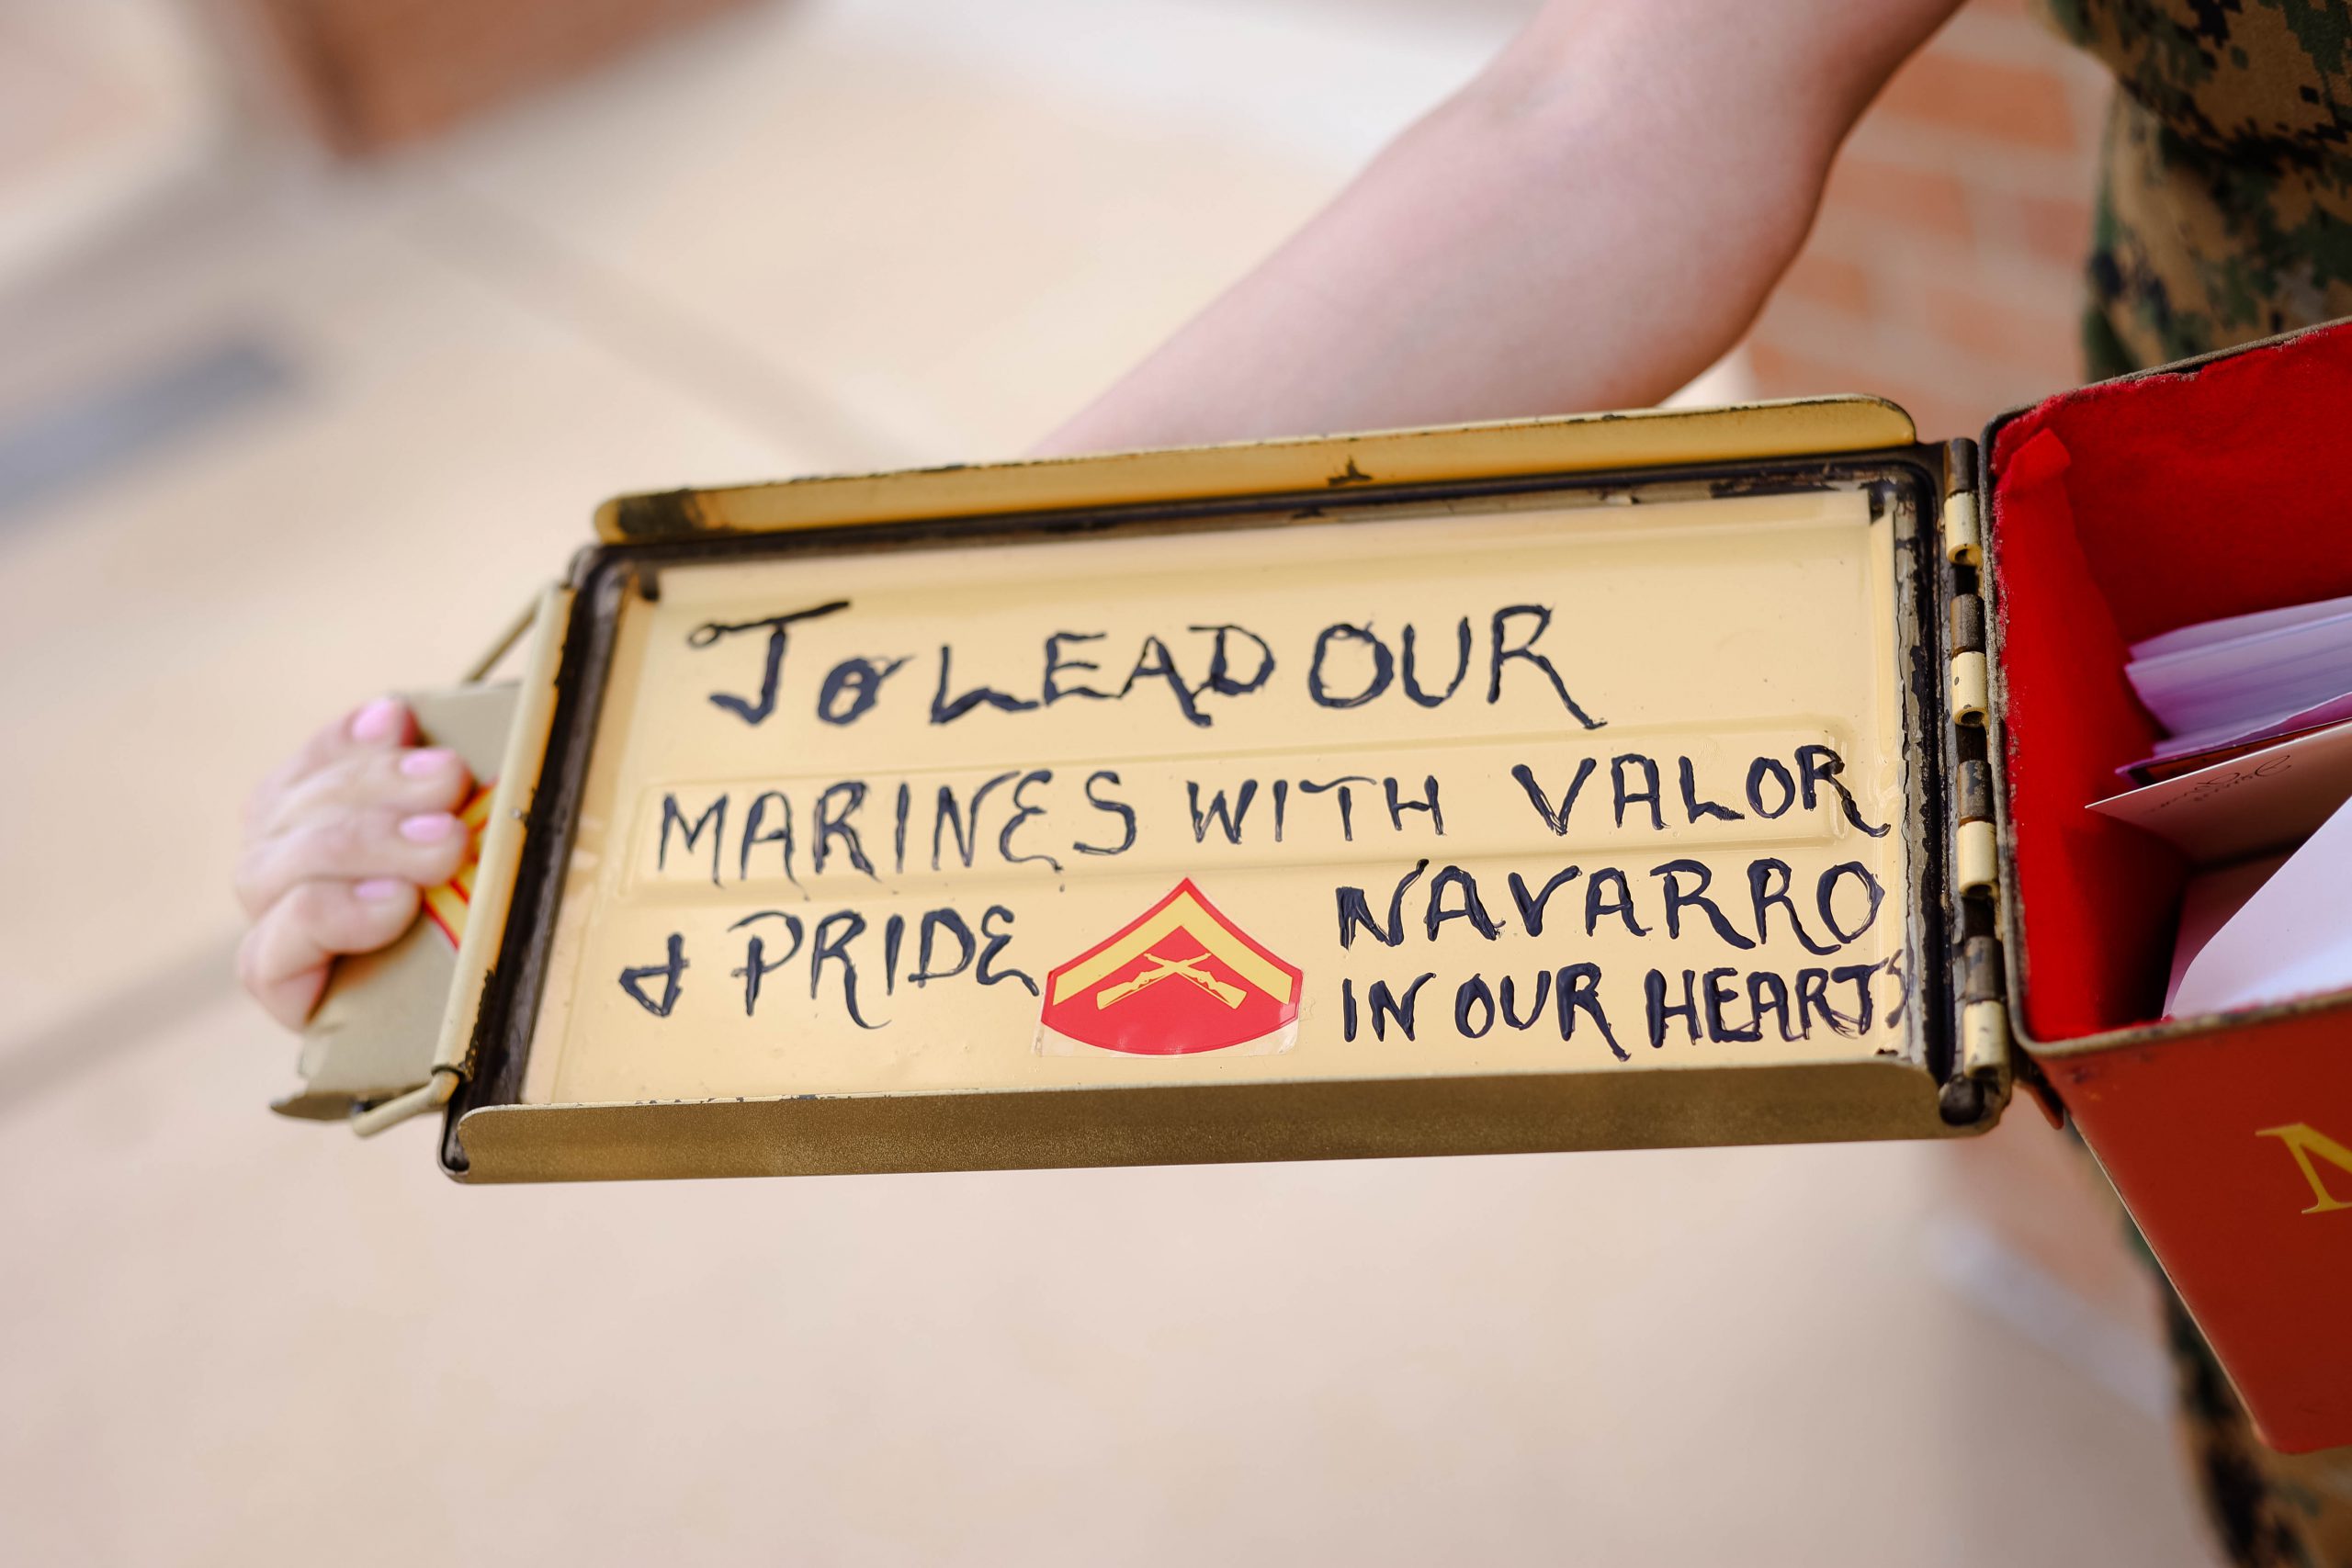 photo of the inside of desiree ornelaz's box that reads "To lead our marines with valor and pride. Navarro in our hearts."